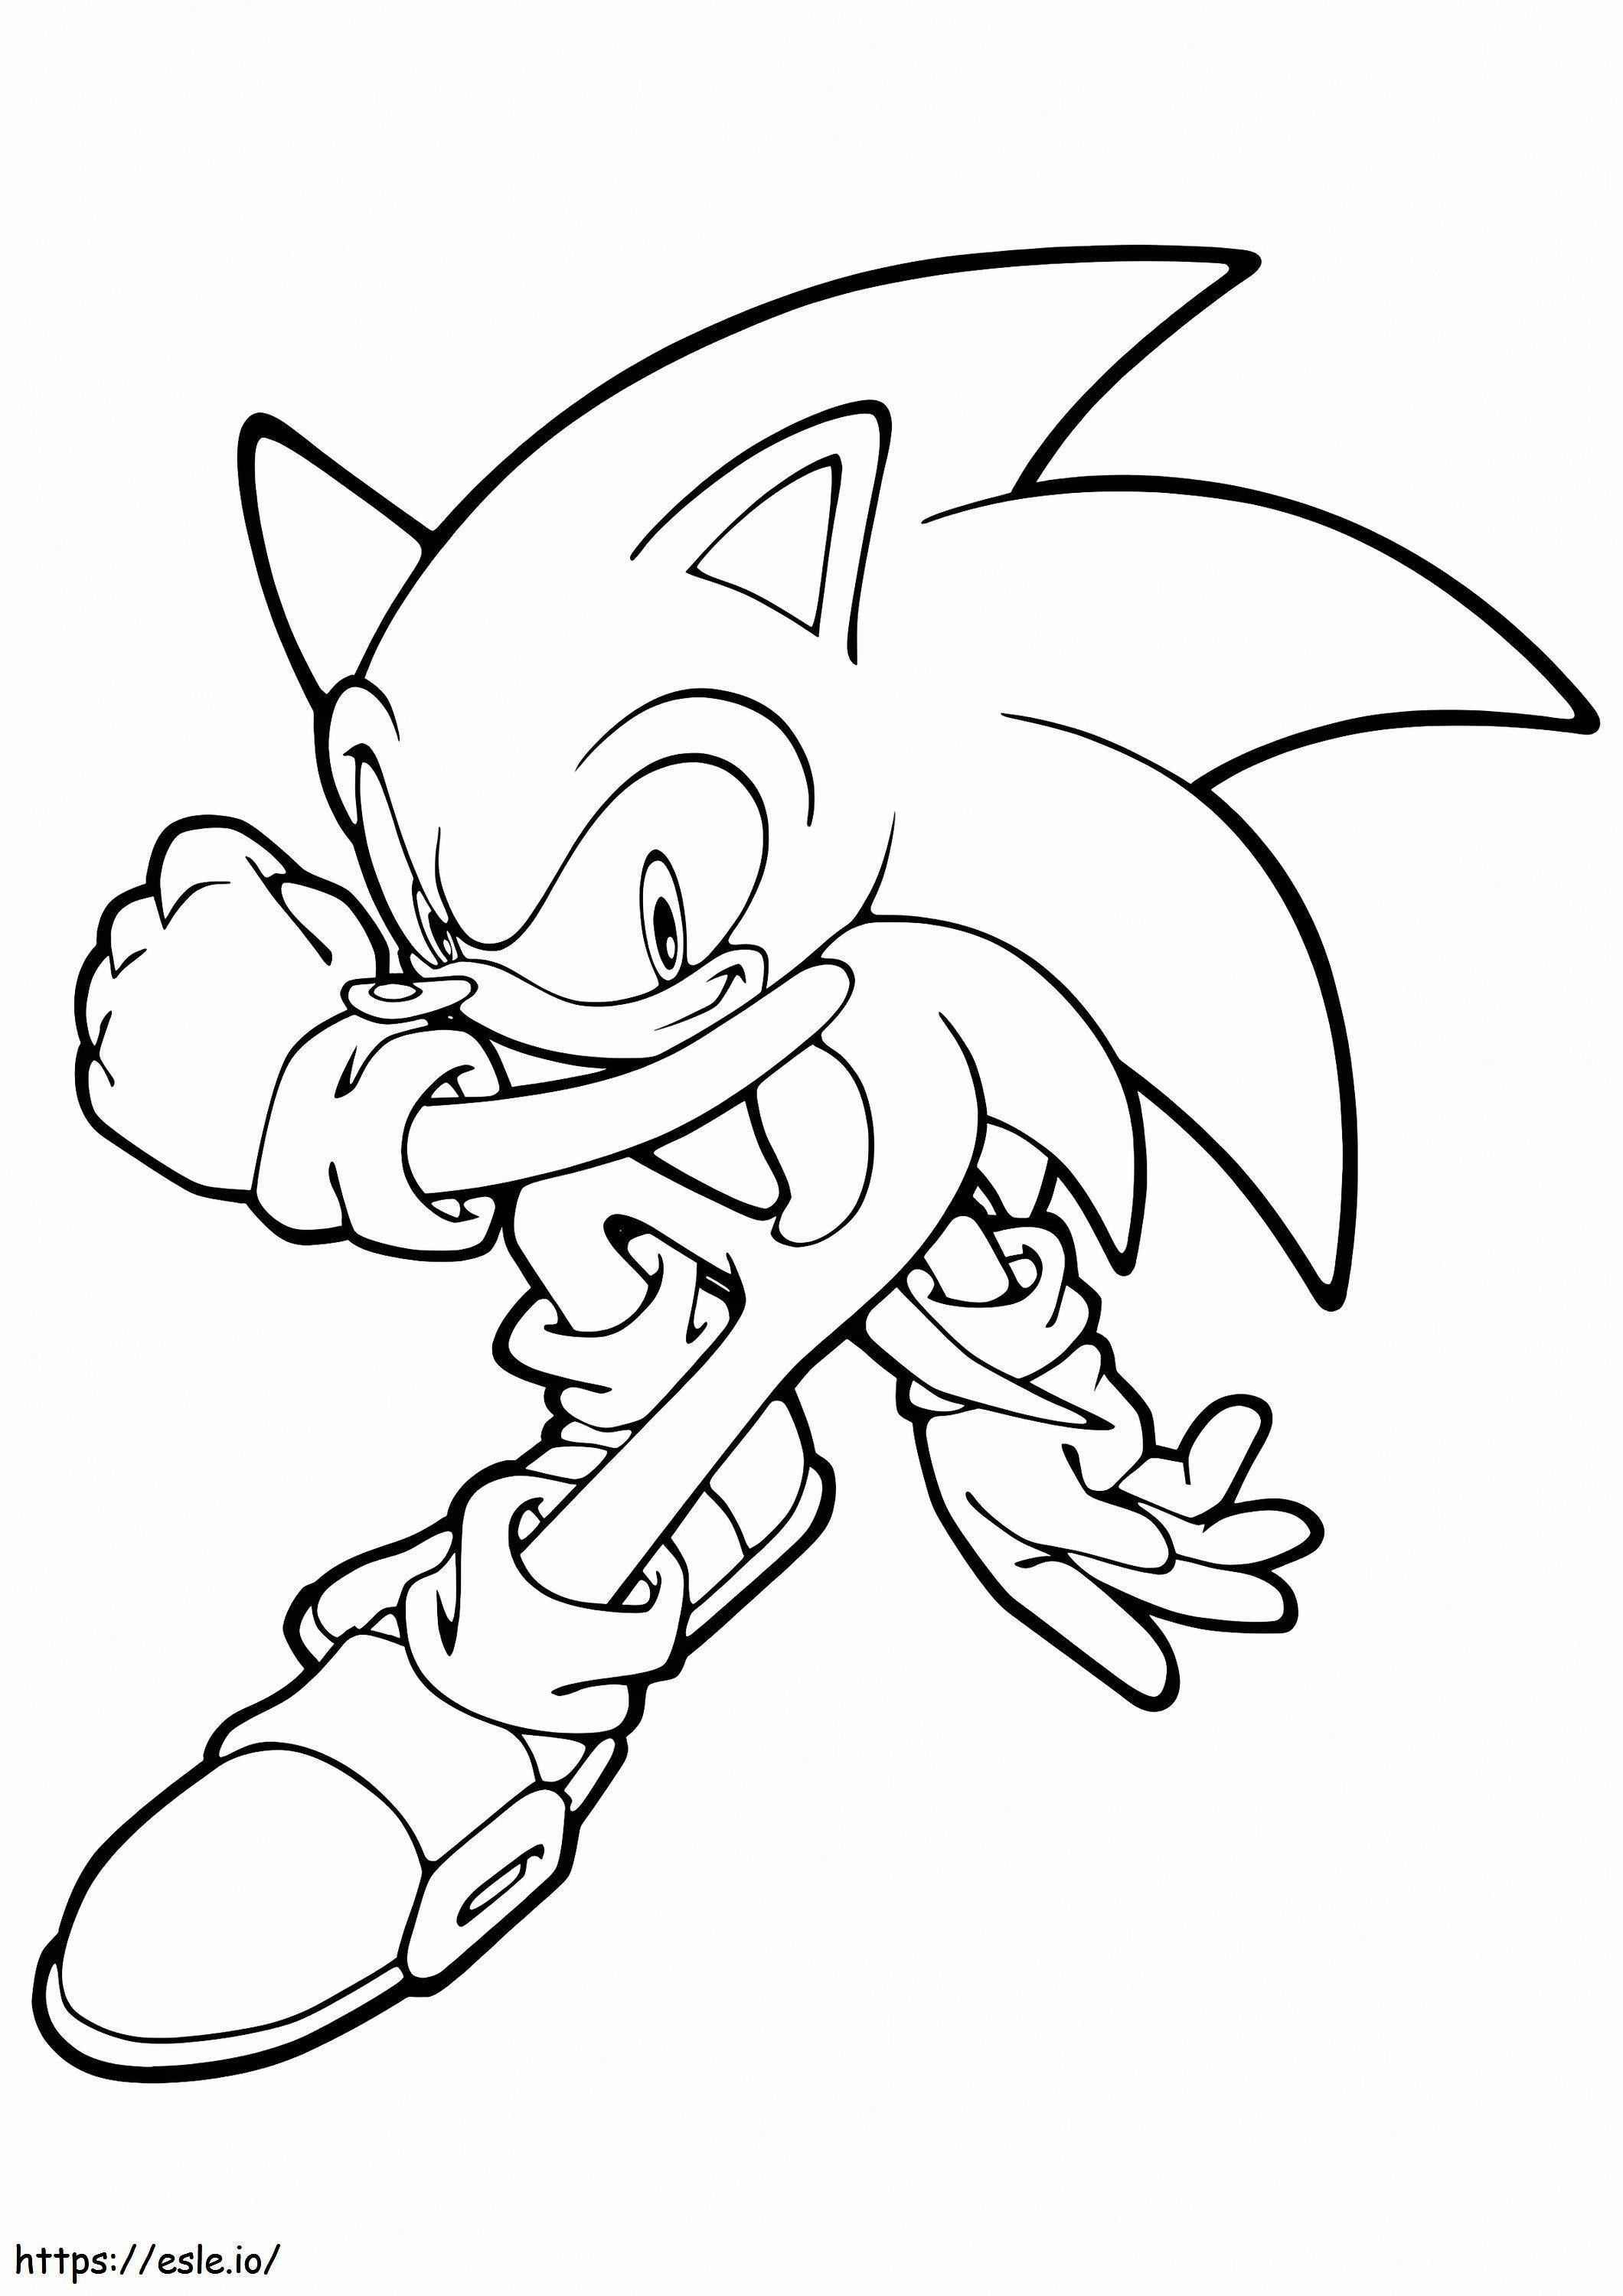 1526380019Sonic131 A4 coloring page